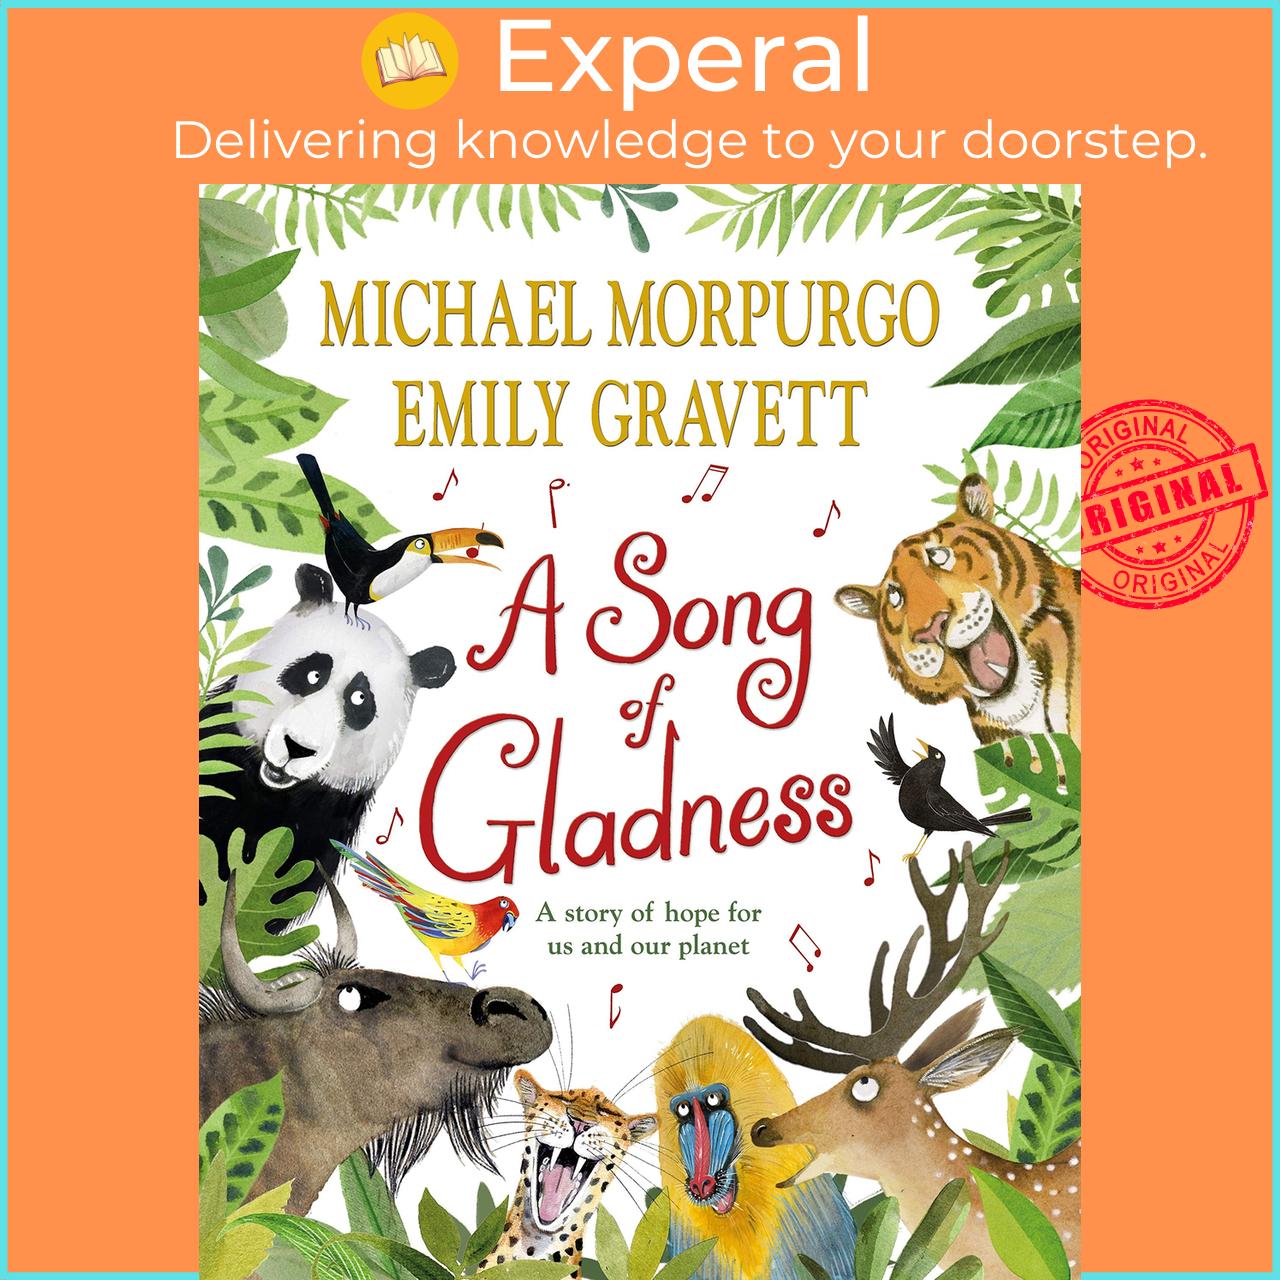 Sách - A Song of Gladness : A Story of Hope for Us and Our Pla by Michael Morpurgo EMILY GRAVETT (UK edition, hardcover)